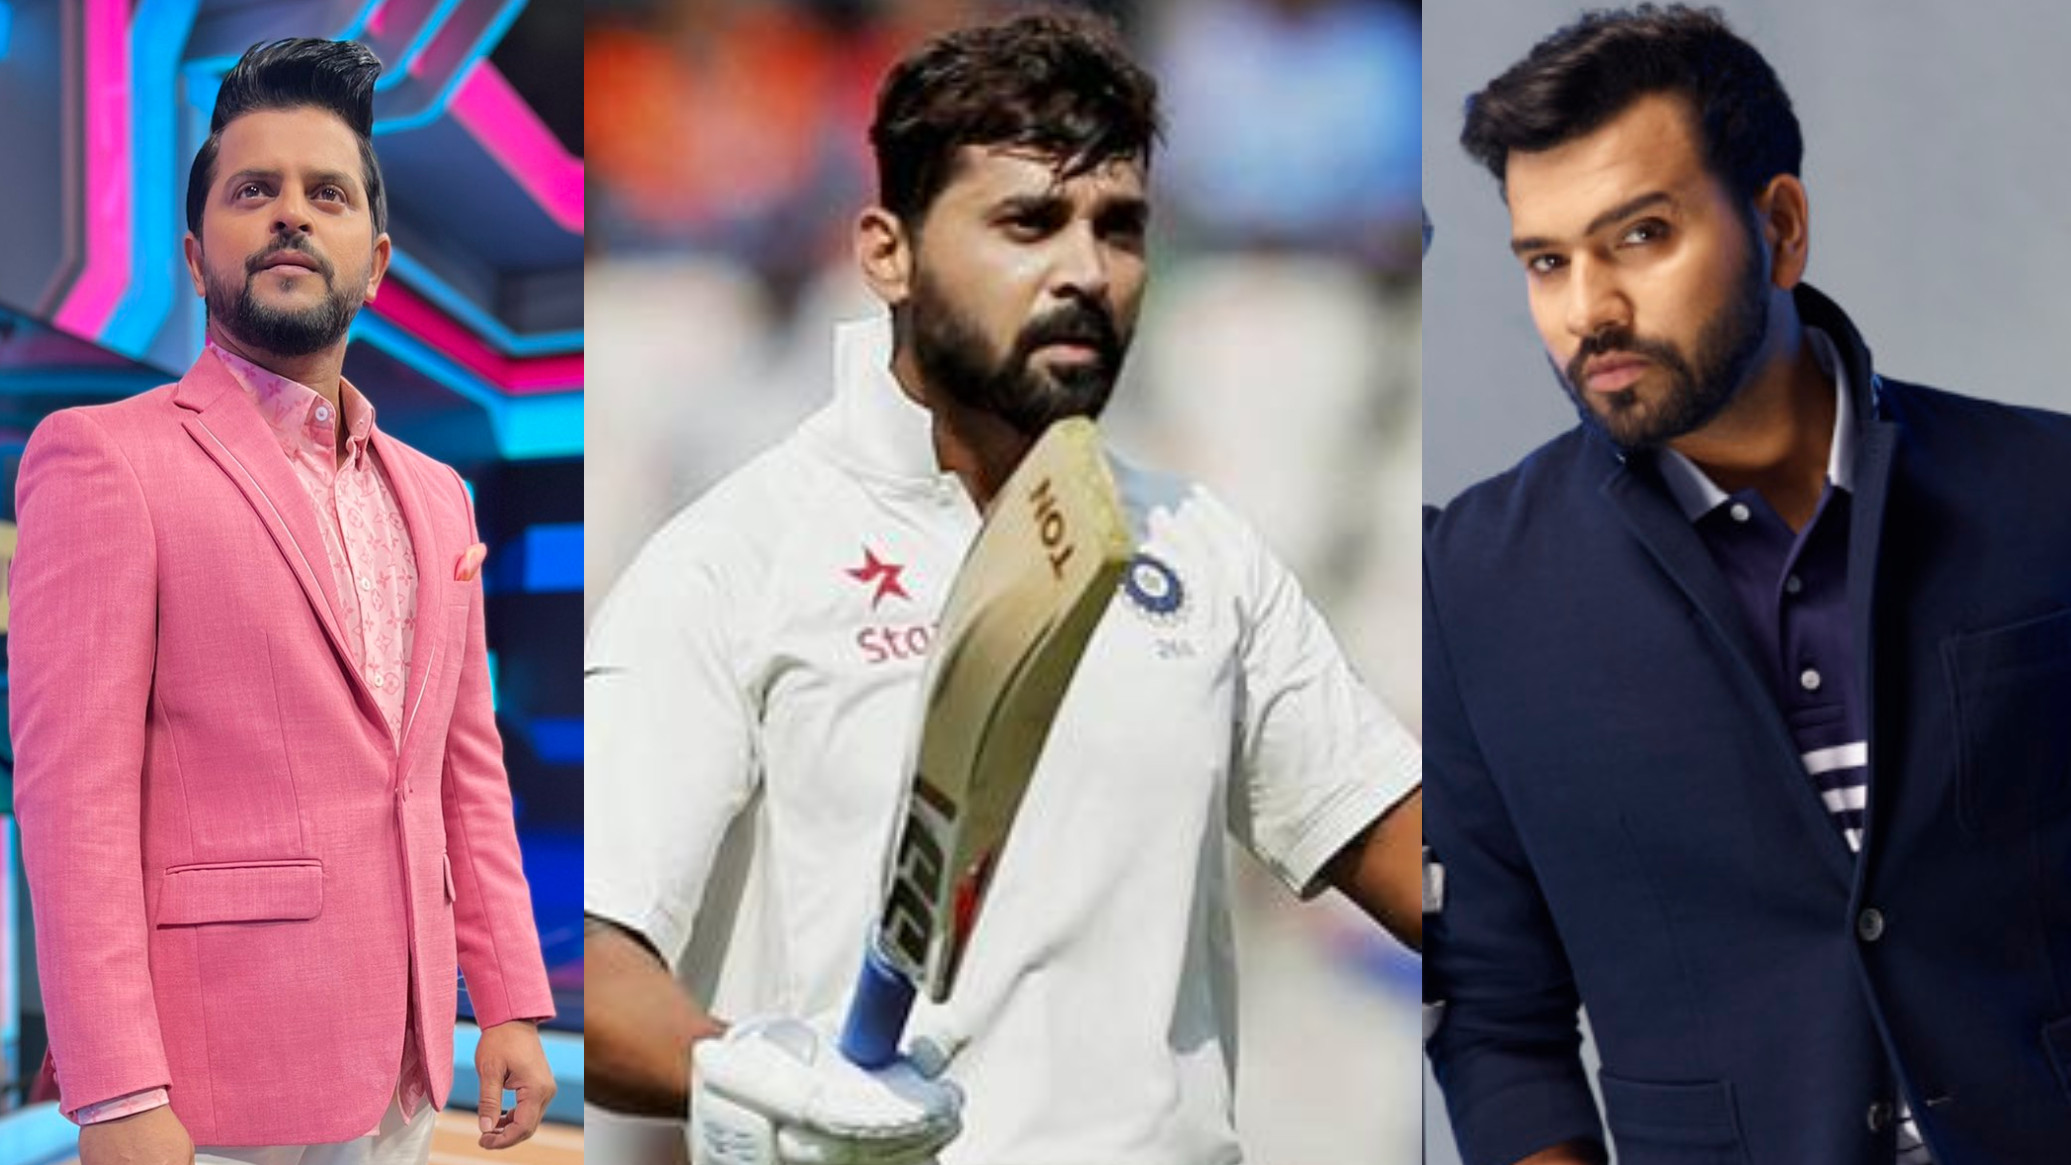 Indian cricket fraternity congratulates Murali Vijay on a wonderful career after his retirement